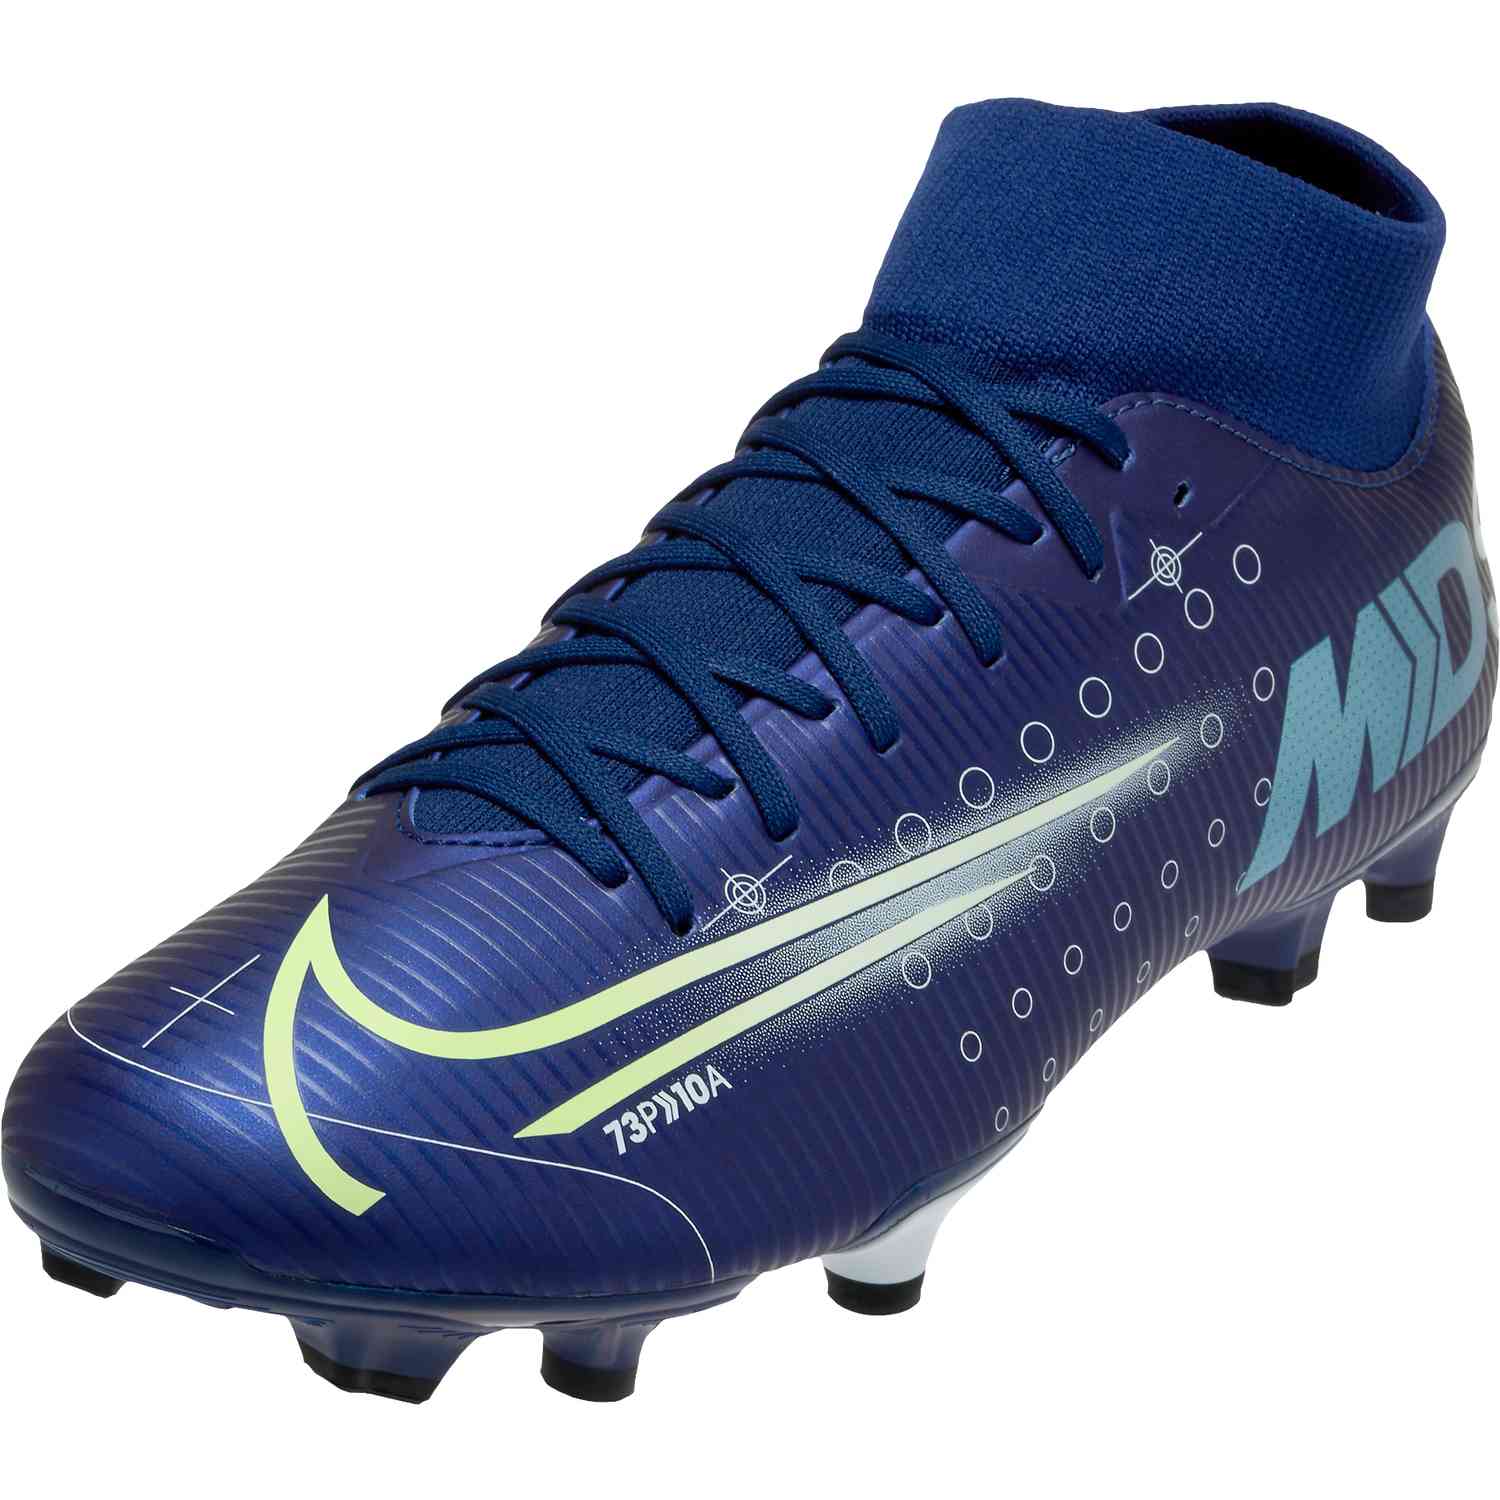 Nike Mercurial Superfly 7 Academy MDS TF. Football factor